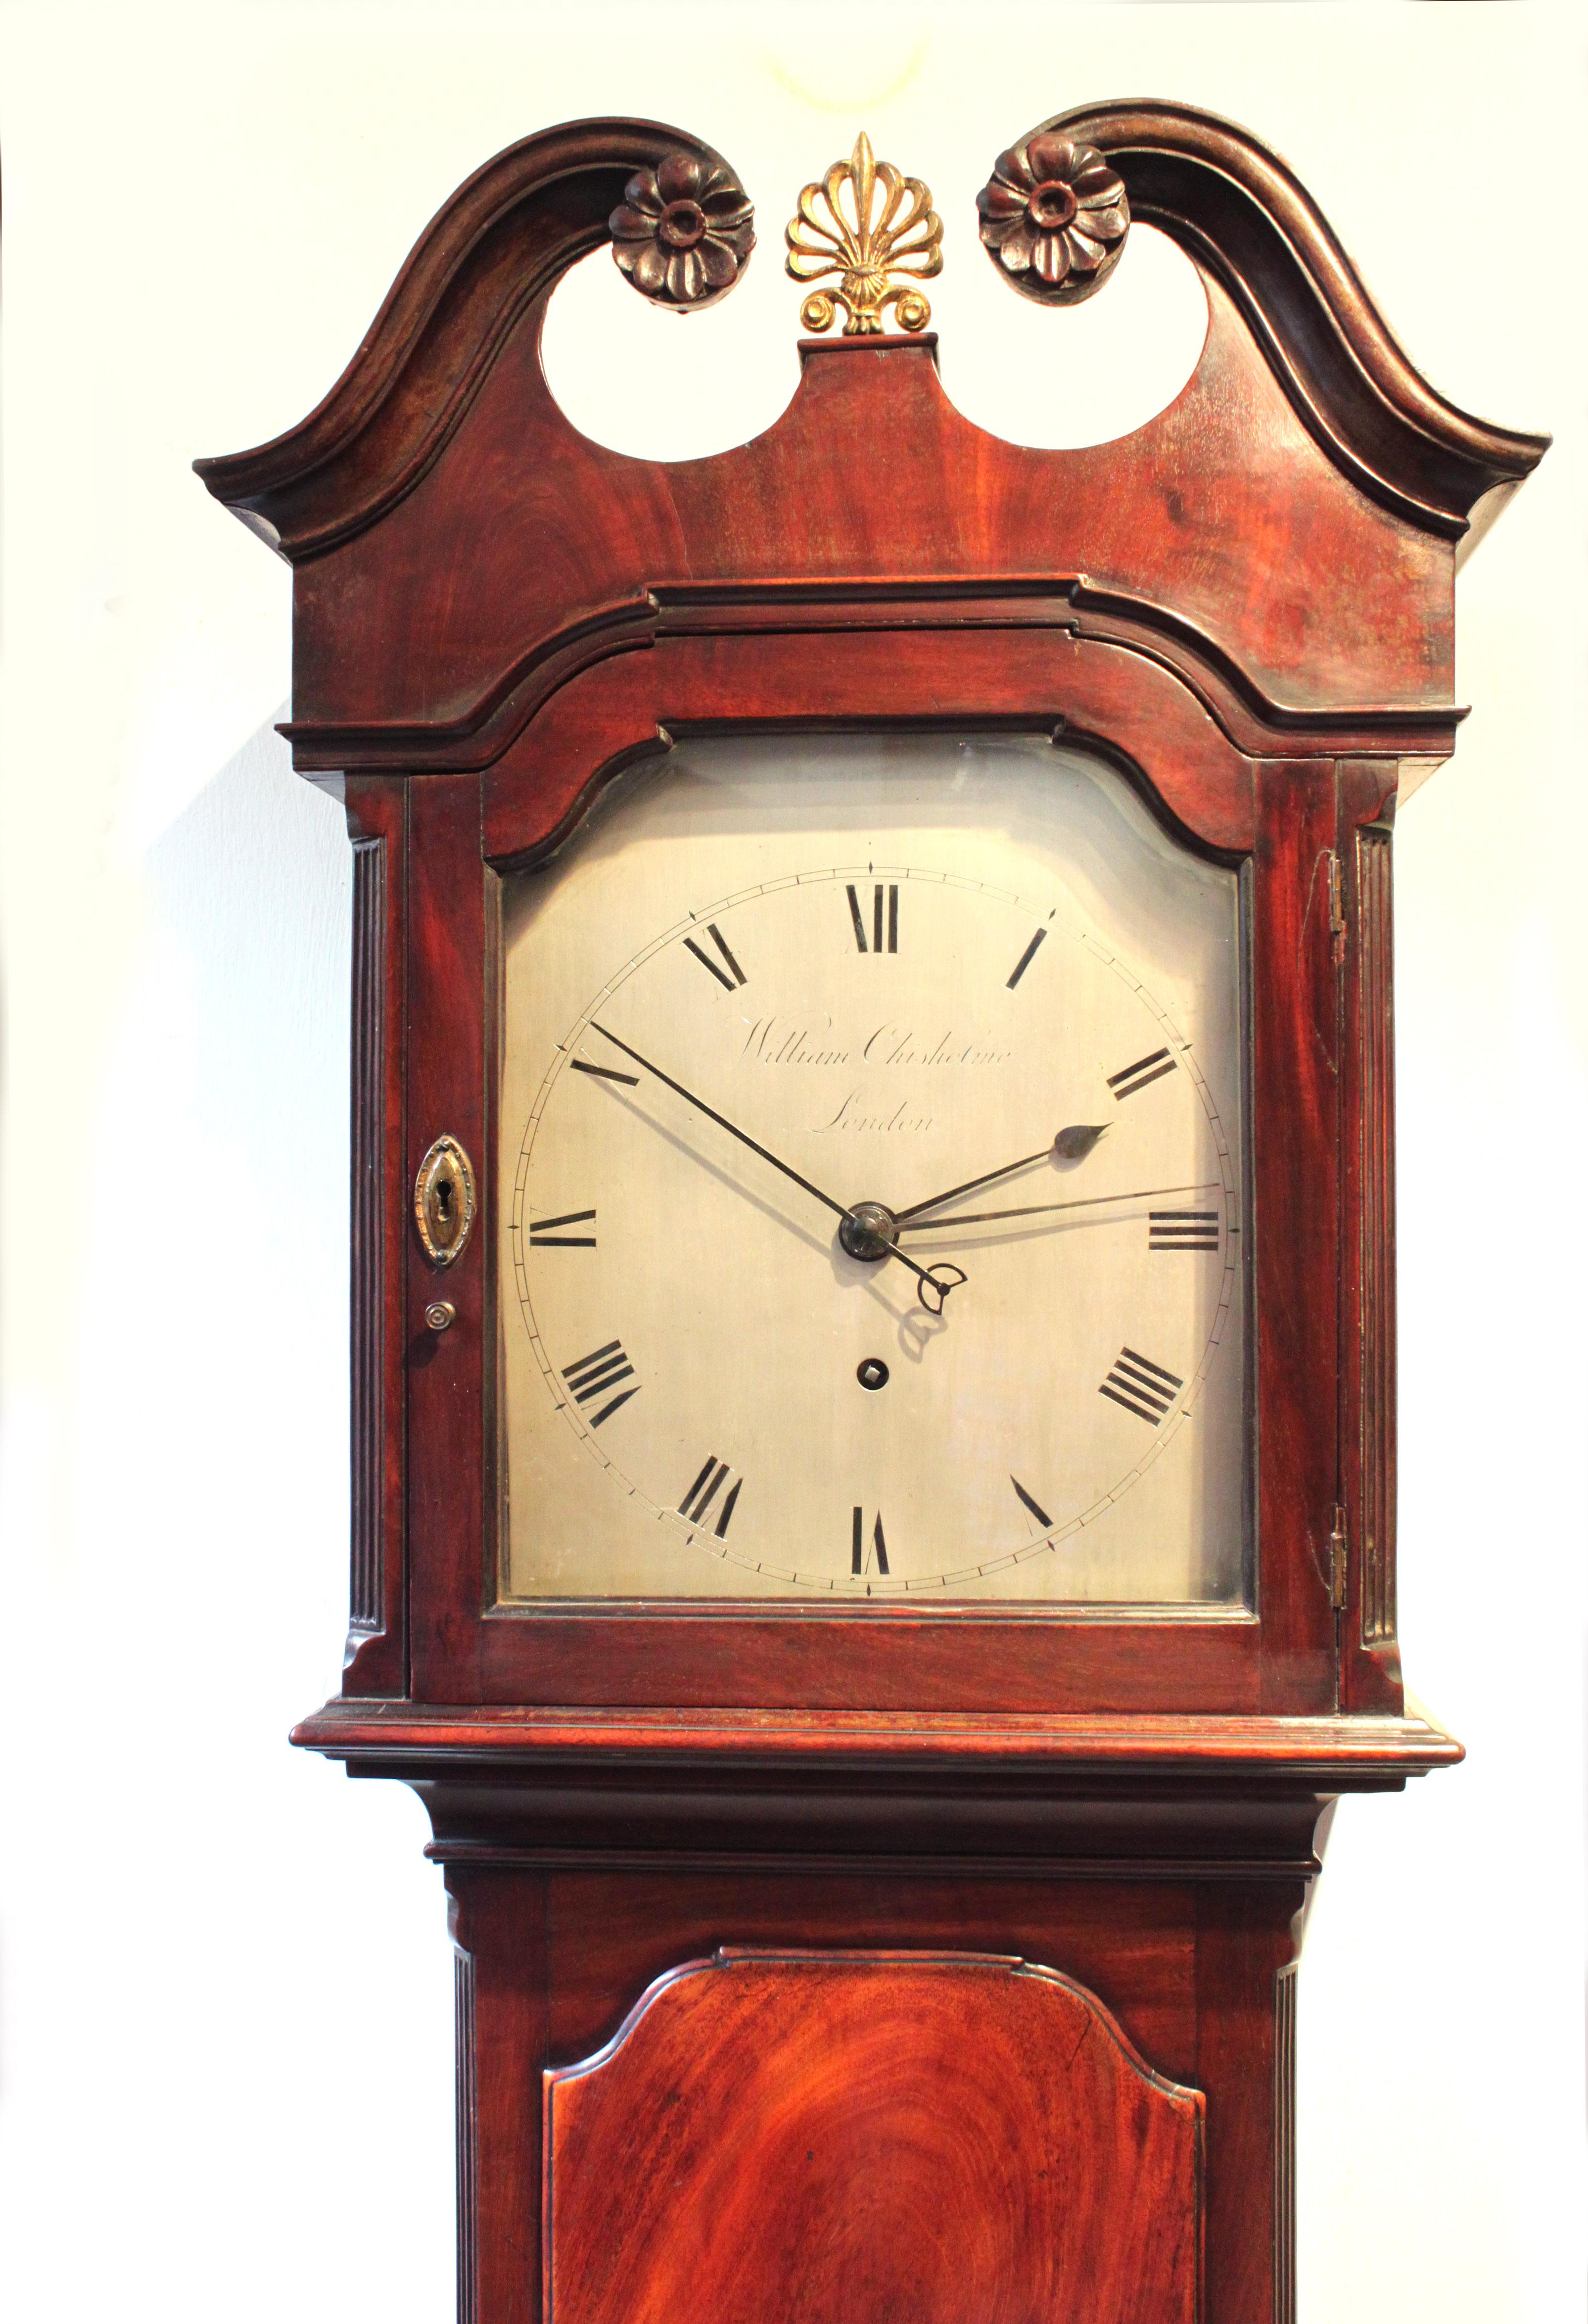 A Regulator clock by William Chisholm, London. Baillie has no record of the maker but by the design of its original case, we believe it to be late 18th century circa 1790. The 8 day movement has just been cleaned and restored and is in good working